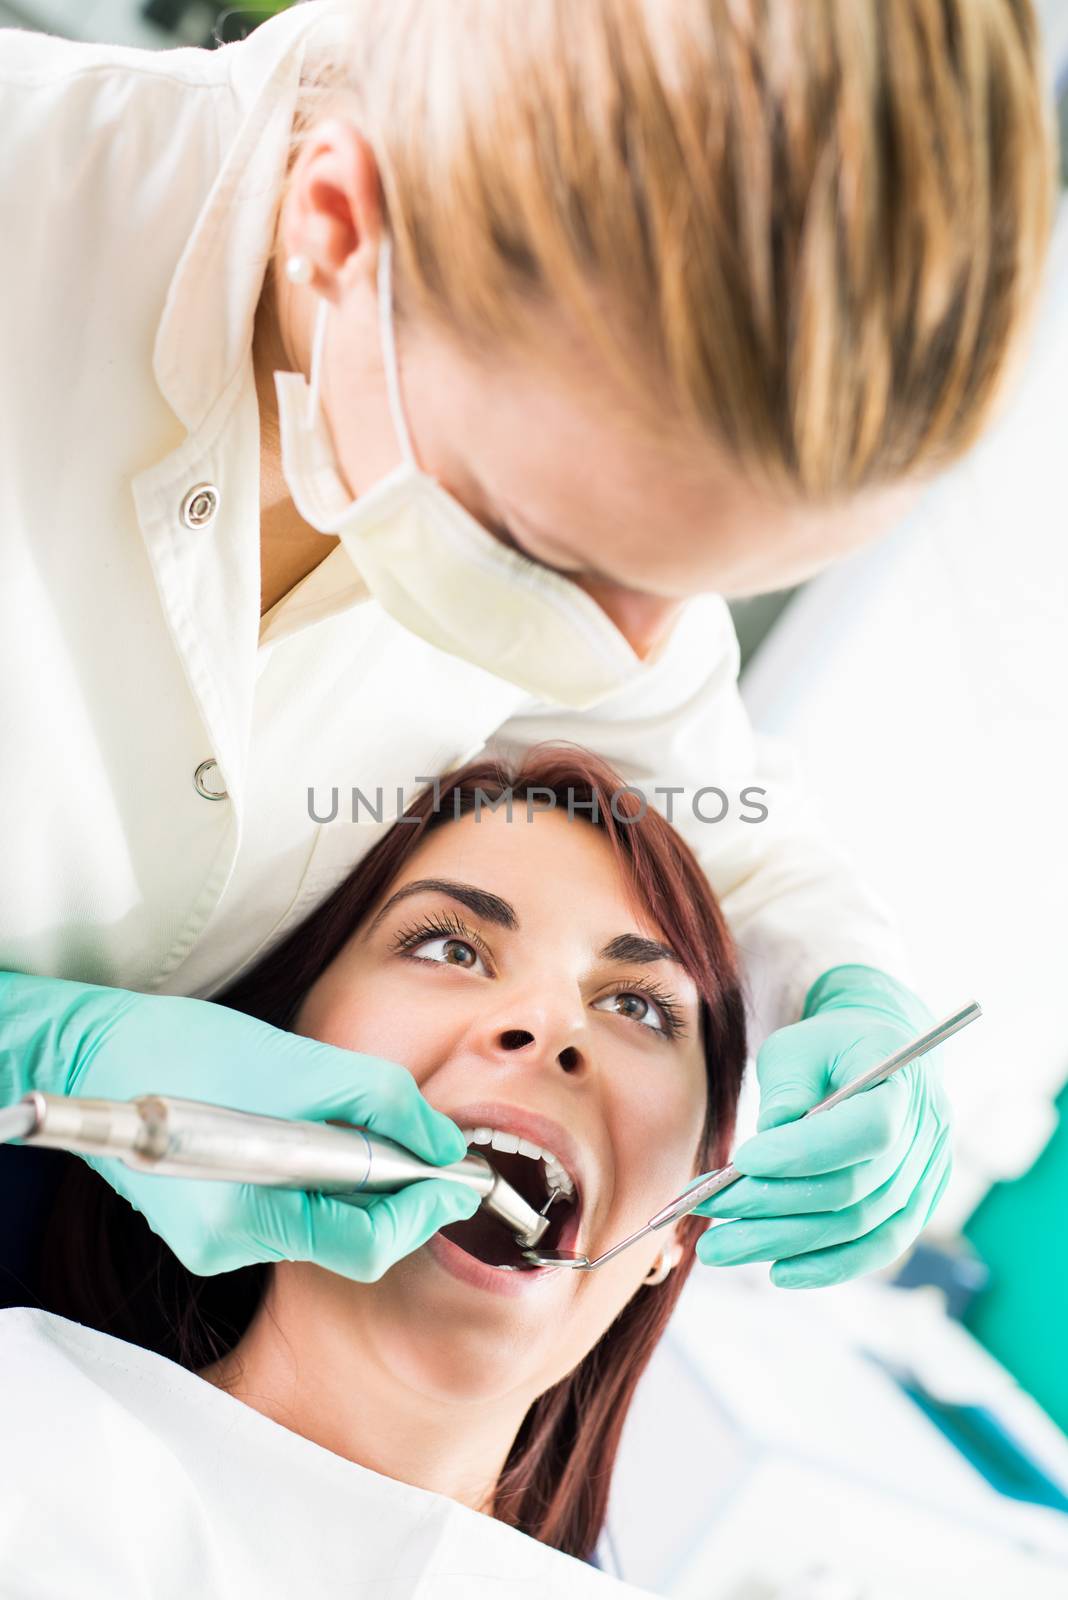 Dental Treatment With Dental Drill by MilanMarkovic78